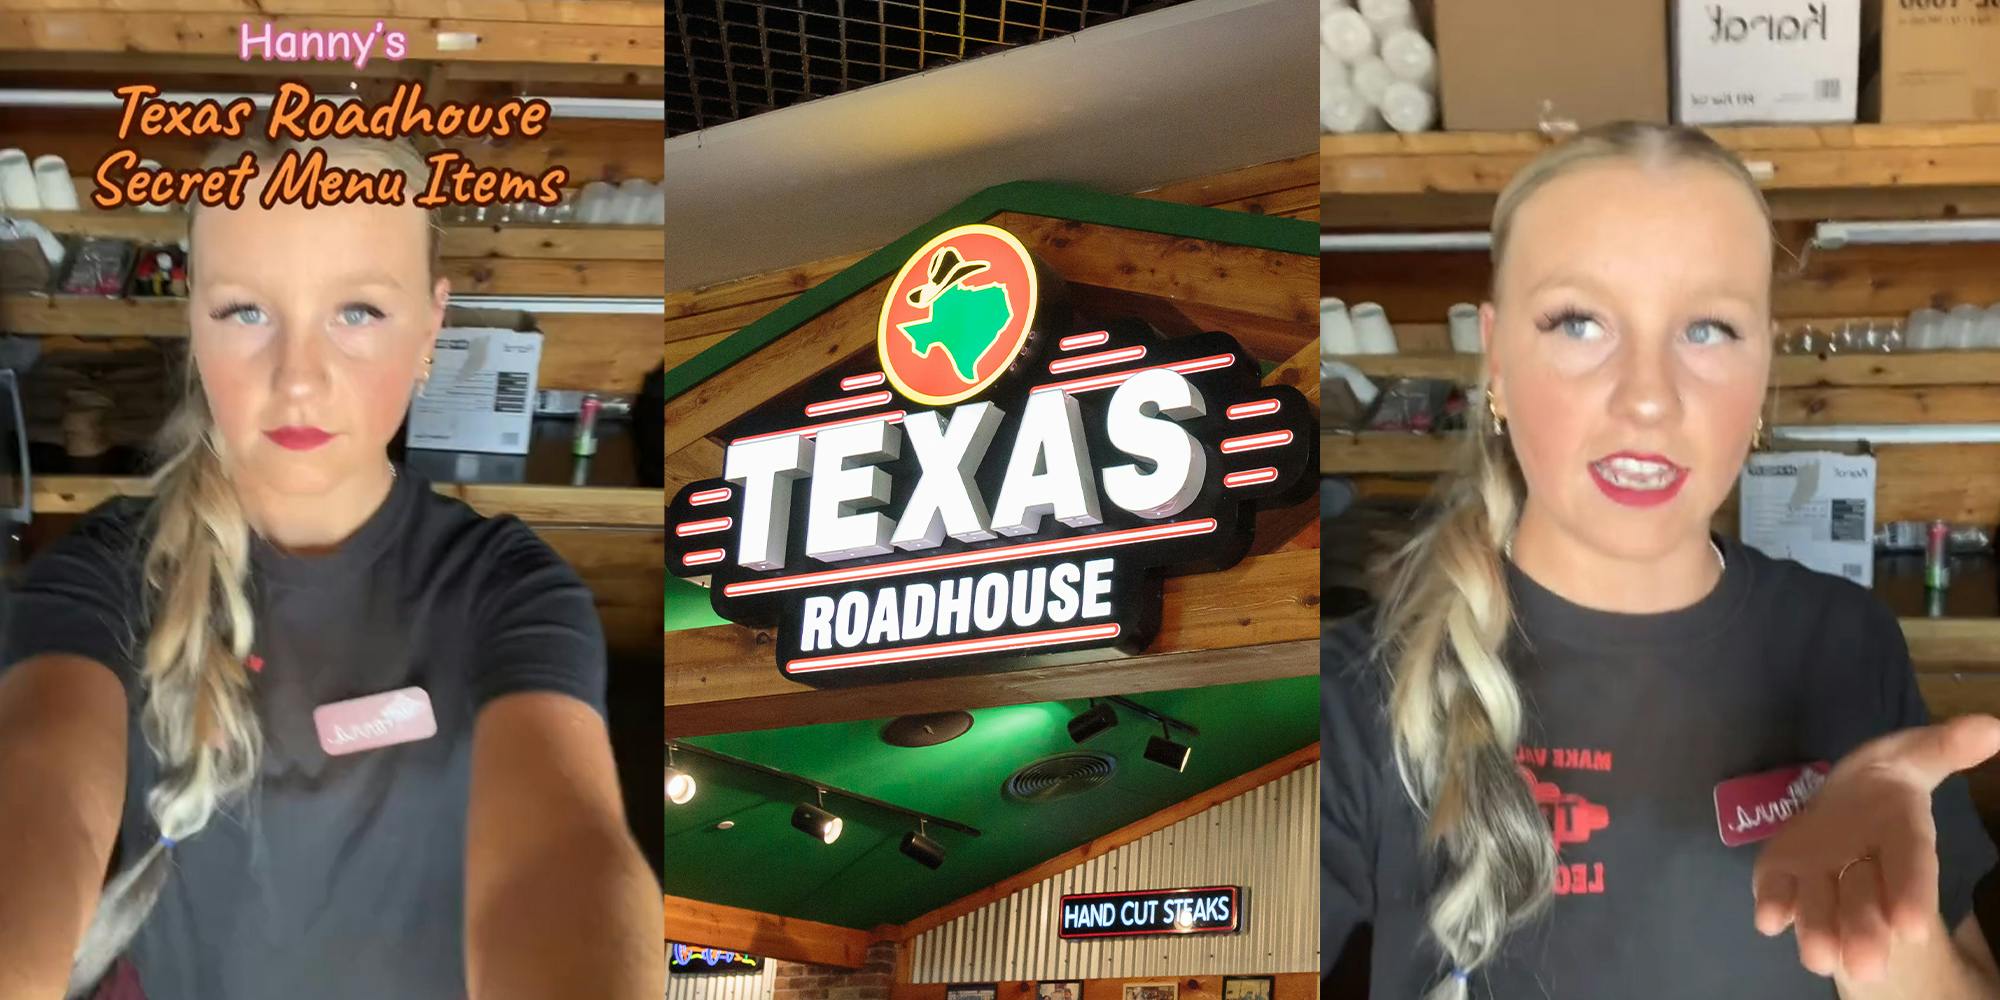 Texas Roadhouse secret menu items with a surprise one at the end